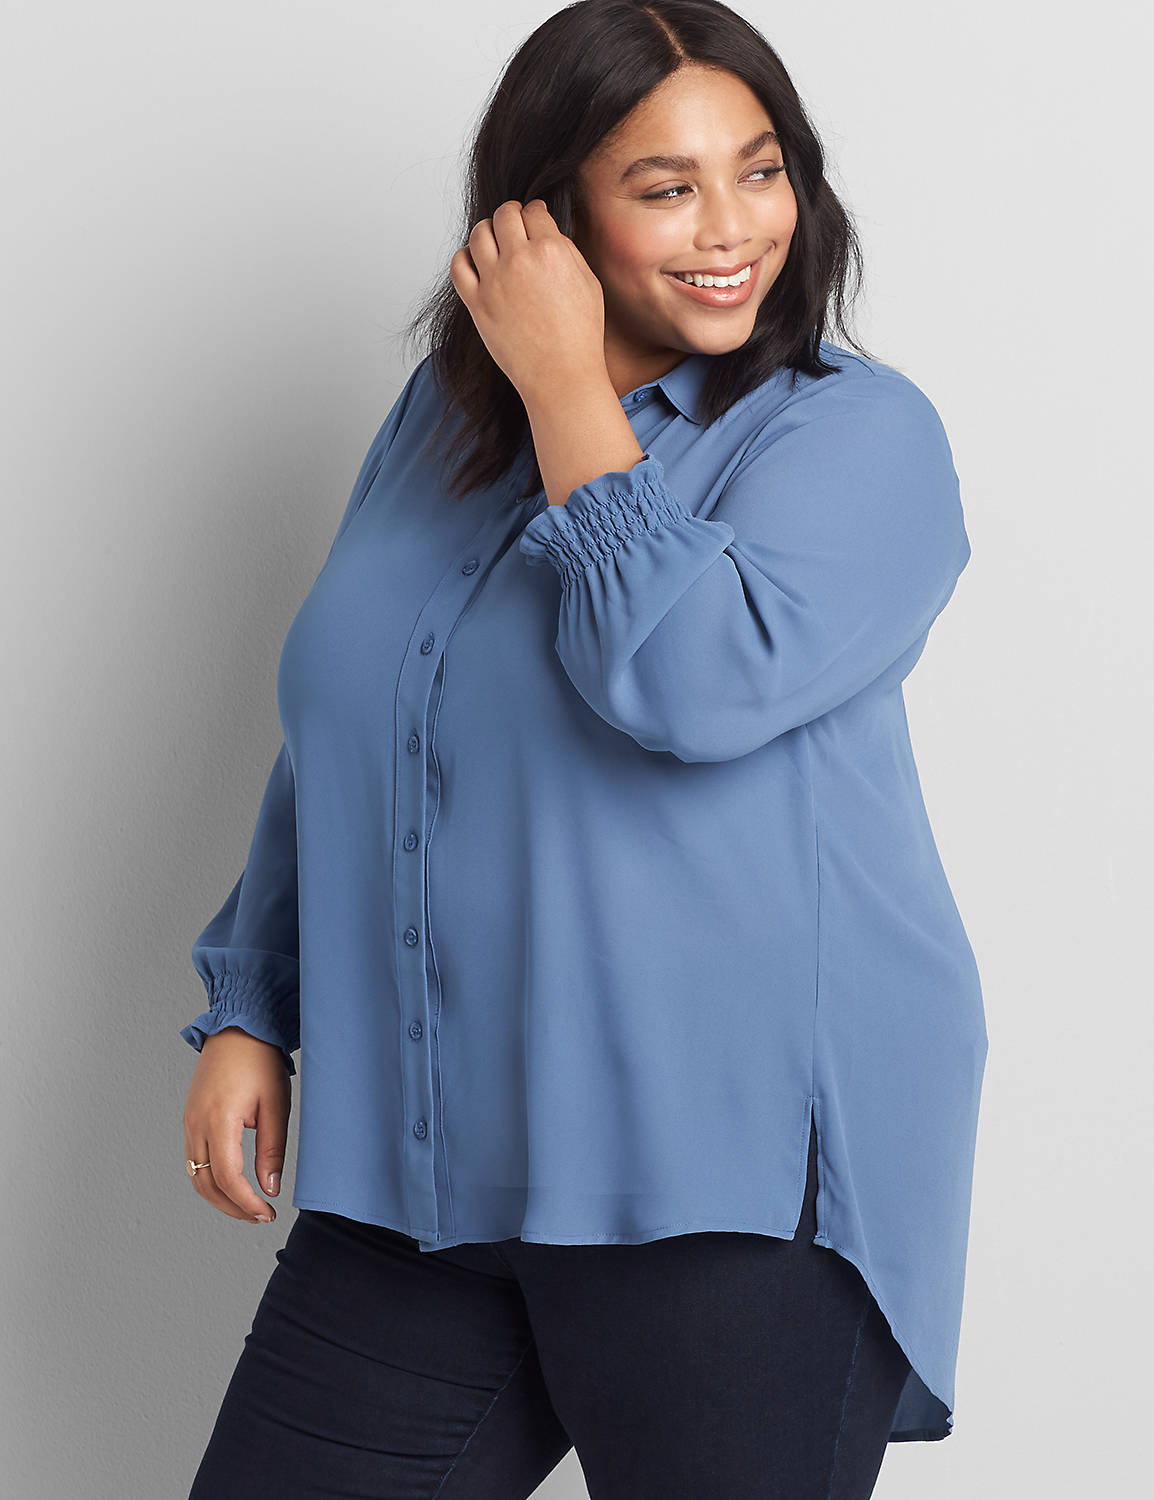 Long Sleeve Button Front Smock Cuff Soft Shirt 1118316:PANTONE Moonlight Blue:10/12 Product Image 1